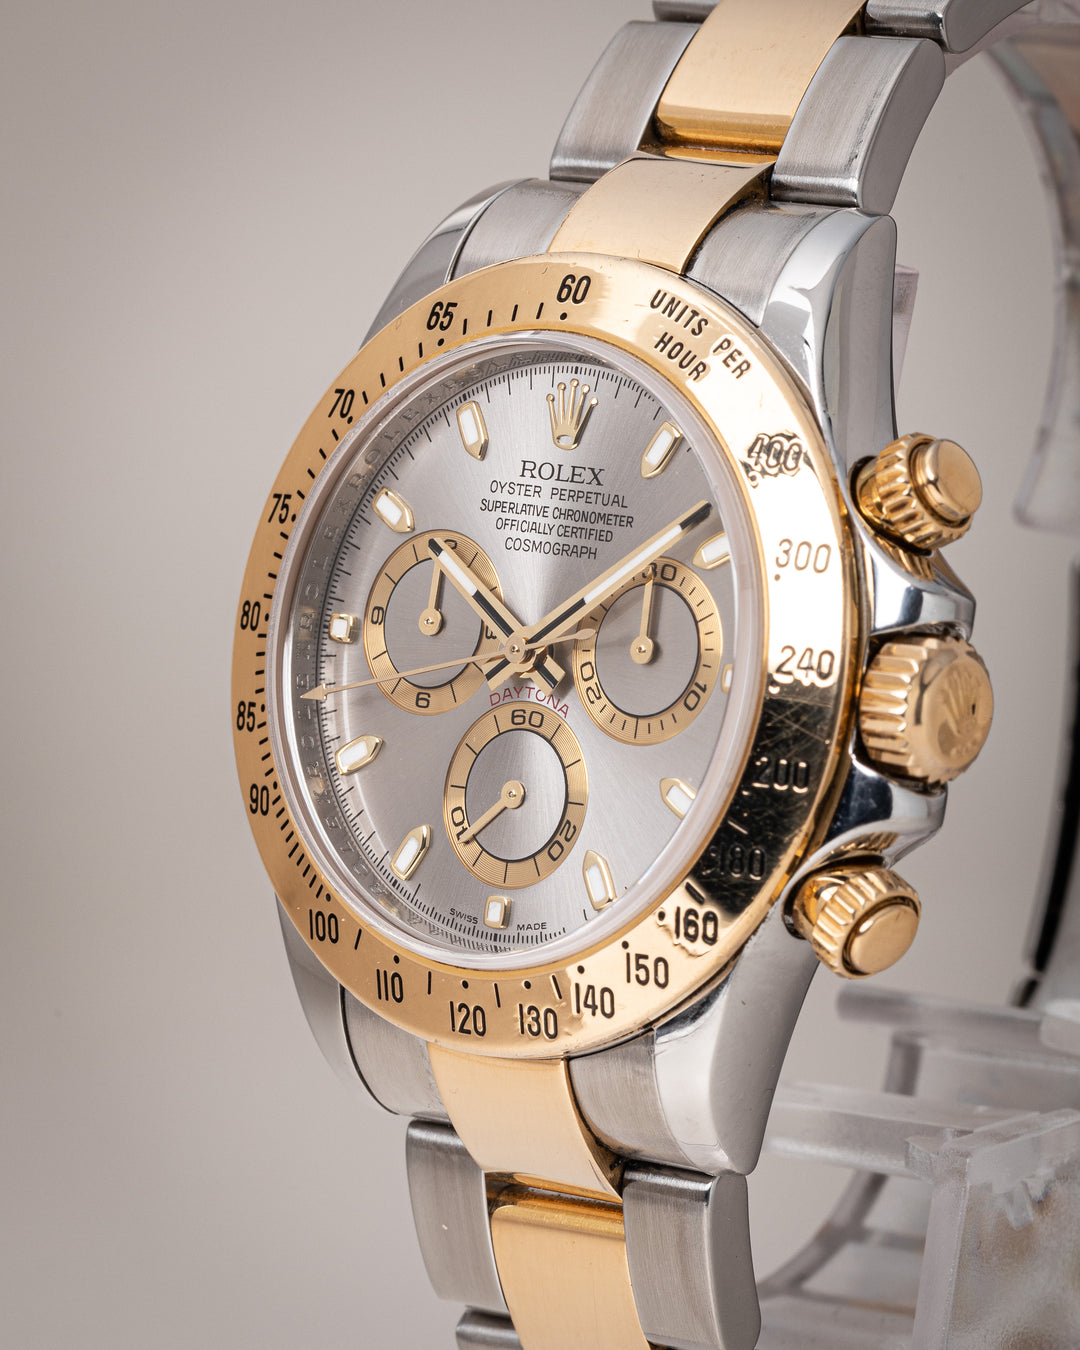 Rolex Stainless Steel and 18k Yellow Gold Cosmograph Daytona (116523)